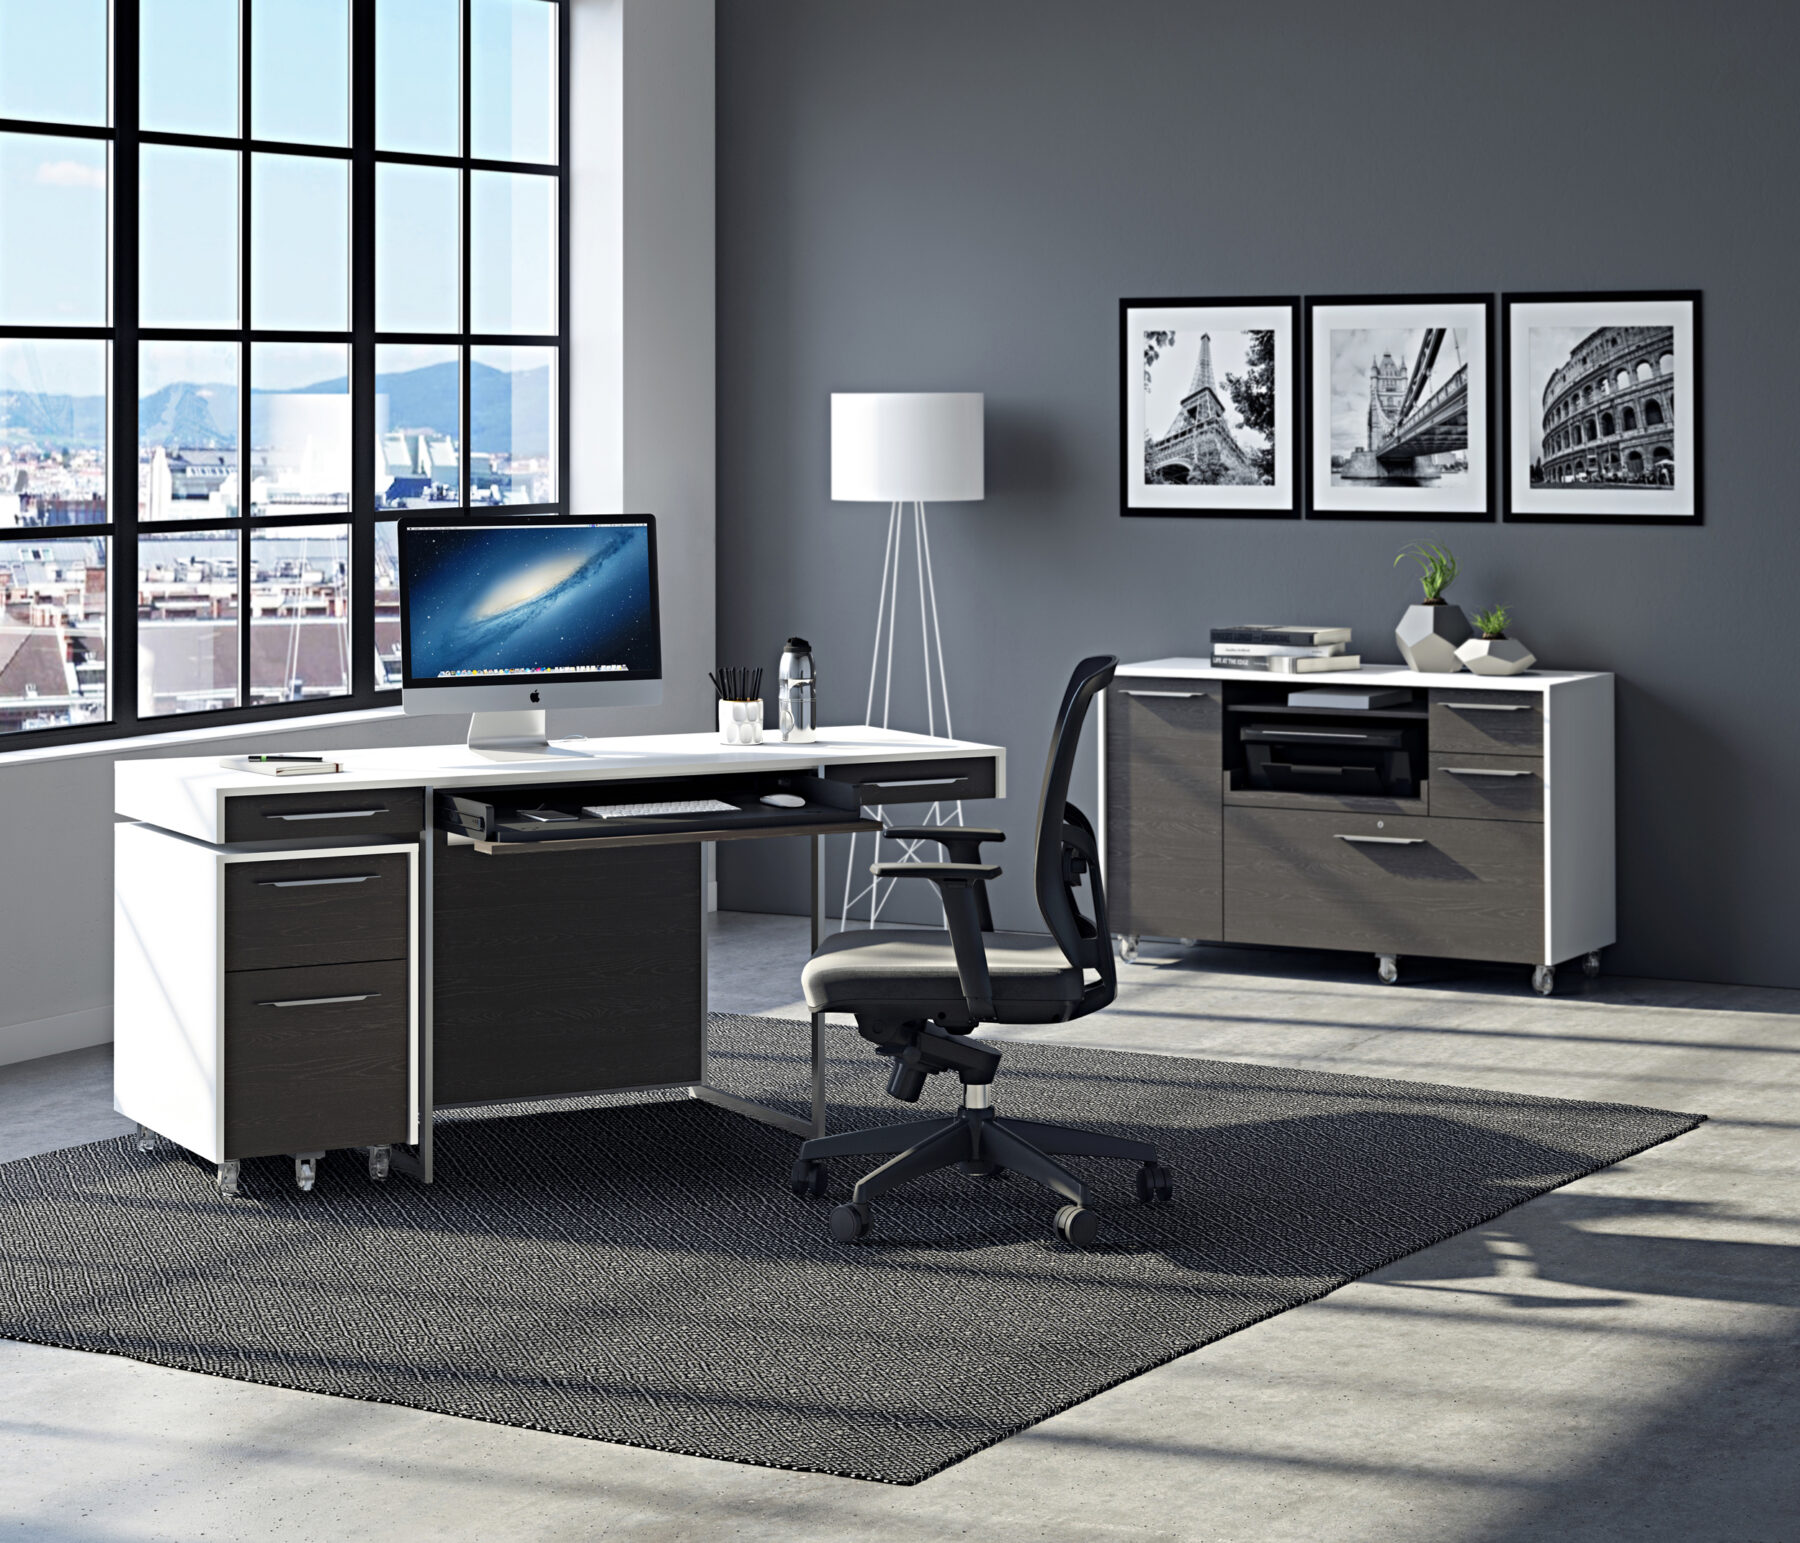 format-collection-bdi-charcoal-modern-office-furniture-lifestyle-3